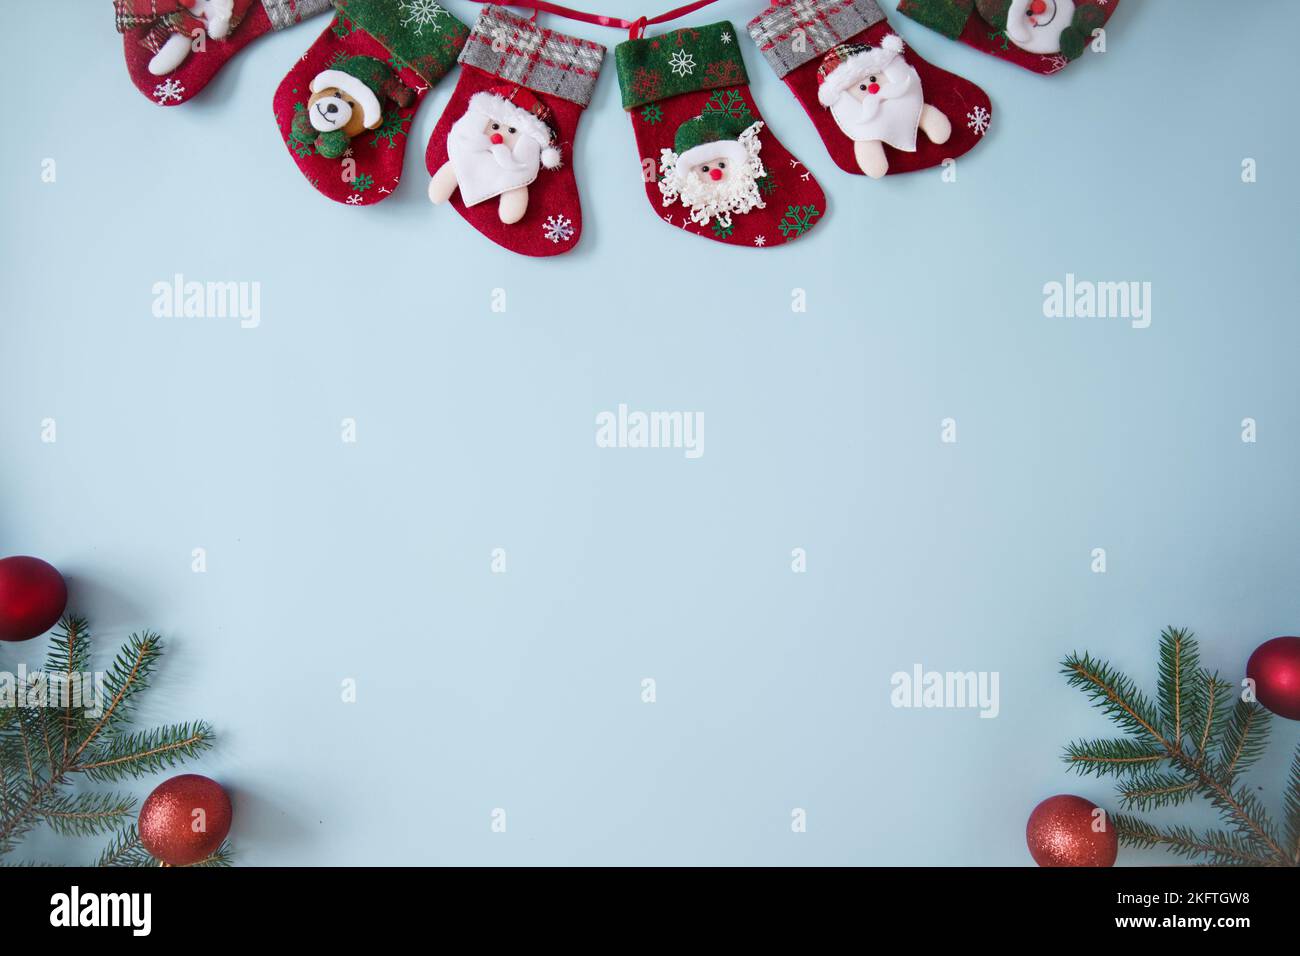 Beautiful Christmas composition on blue background. Сhristmas socks ,fir spruce branches, Top view, copy space. Stock Photo